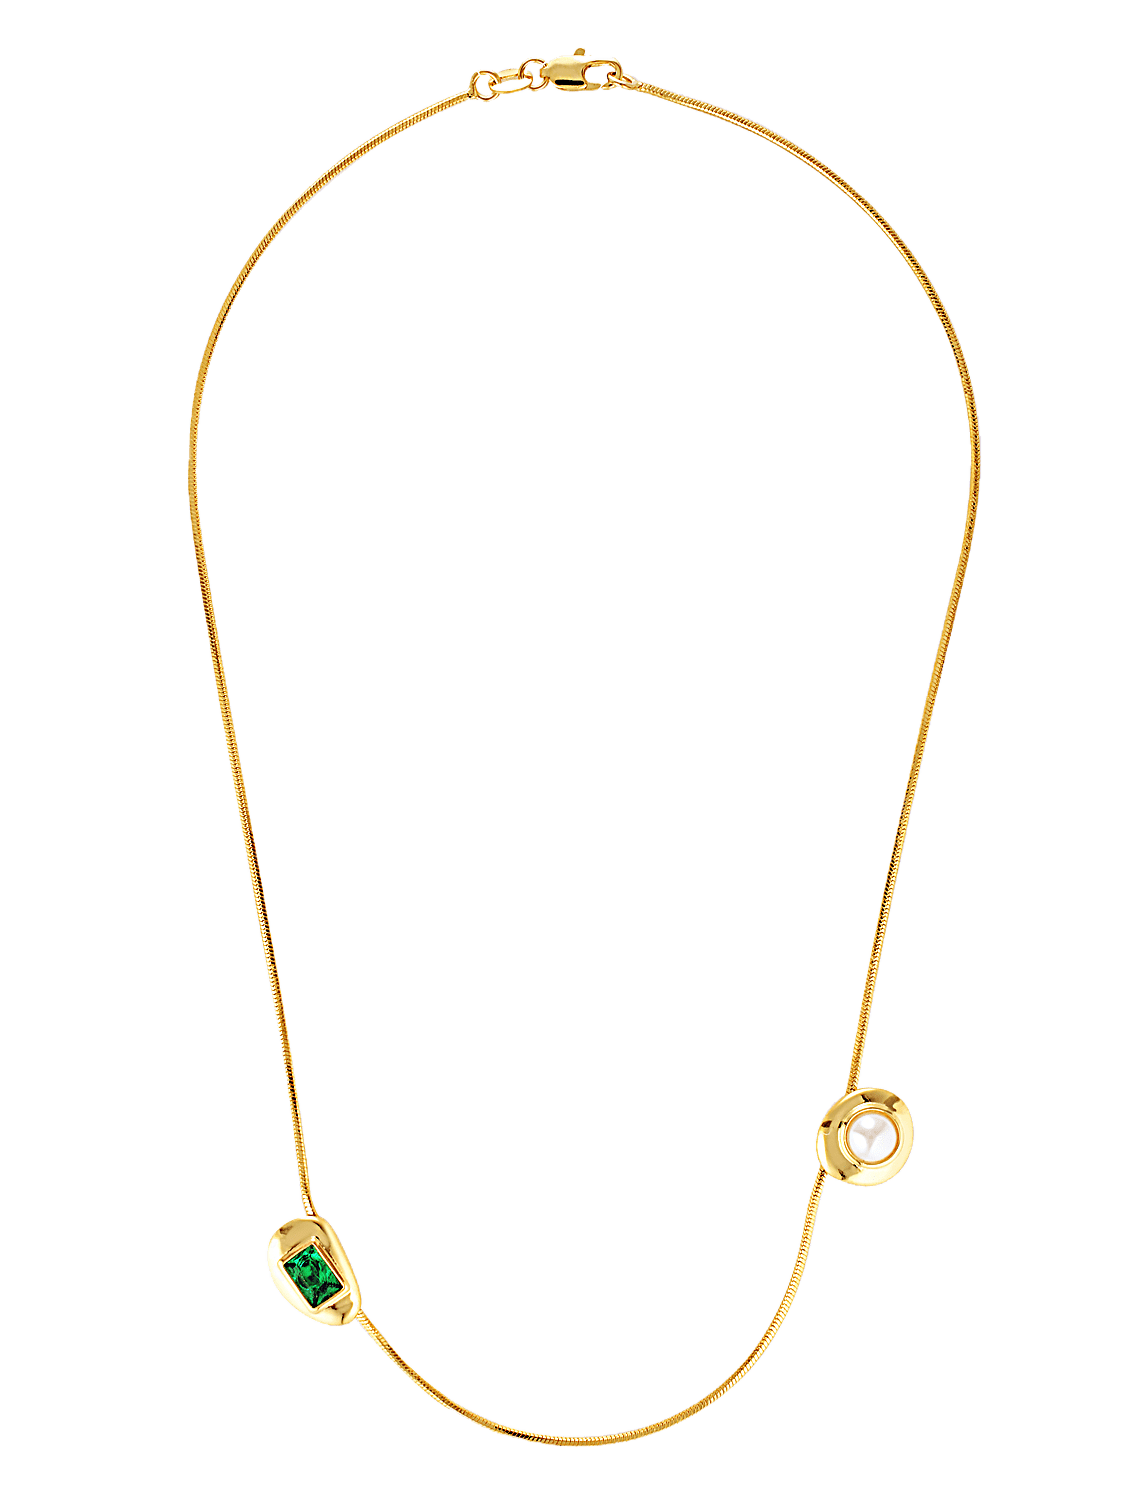 Fine gold fill necklace with emerald and pearl 